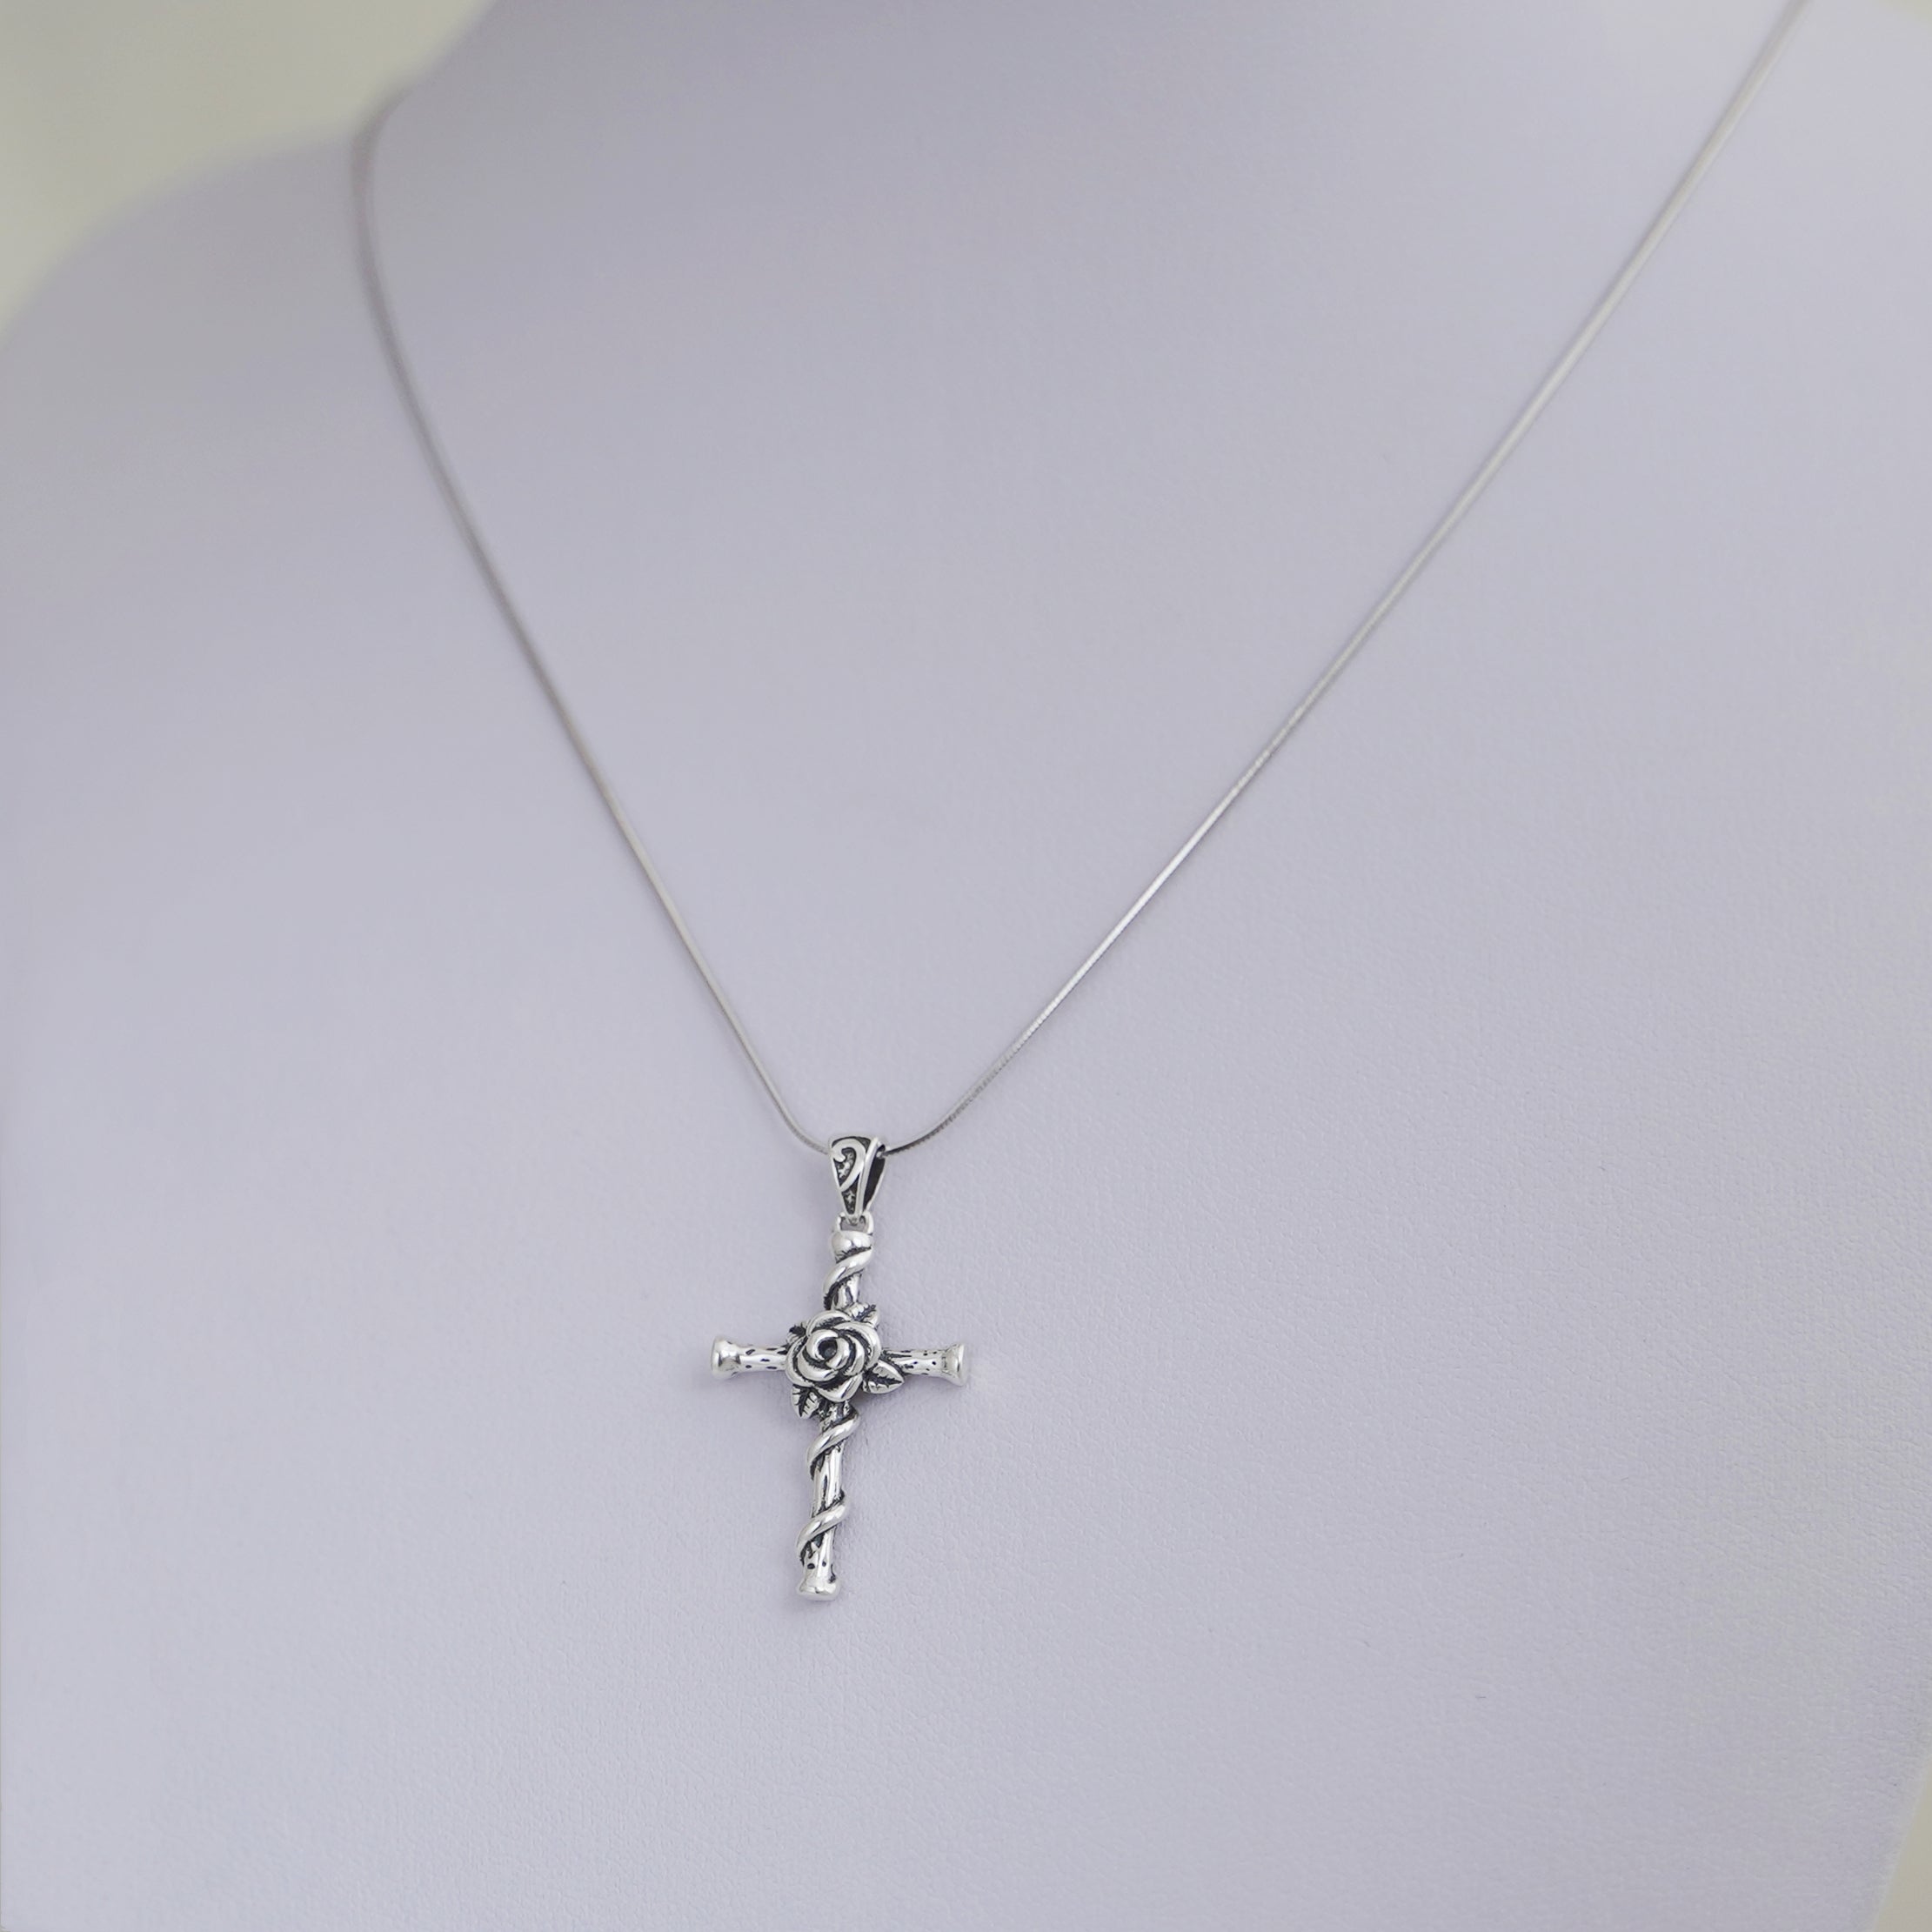 1 3/8in 0.925 Sterling Silver Thorn Cross Pendant Necklace | eBay